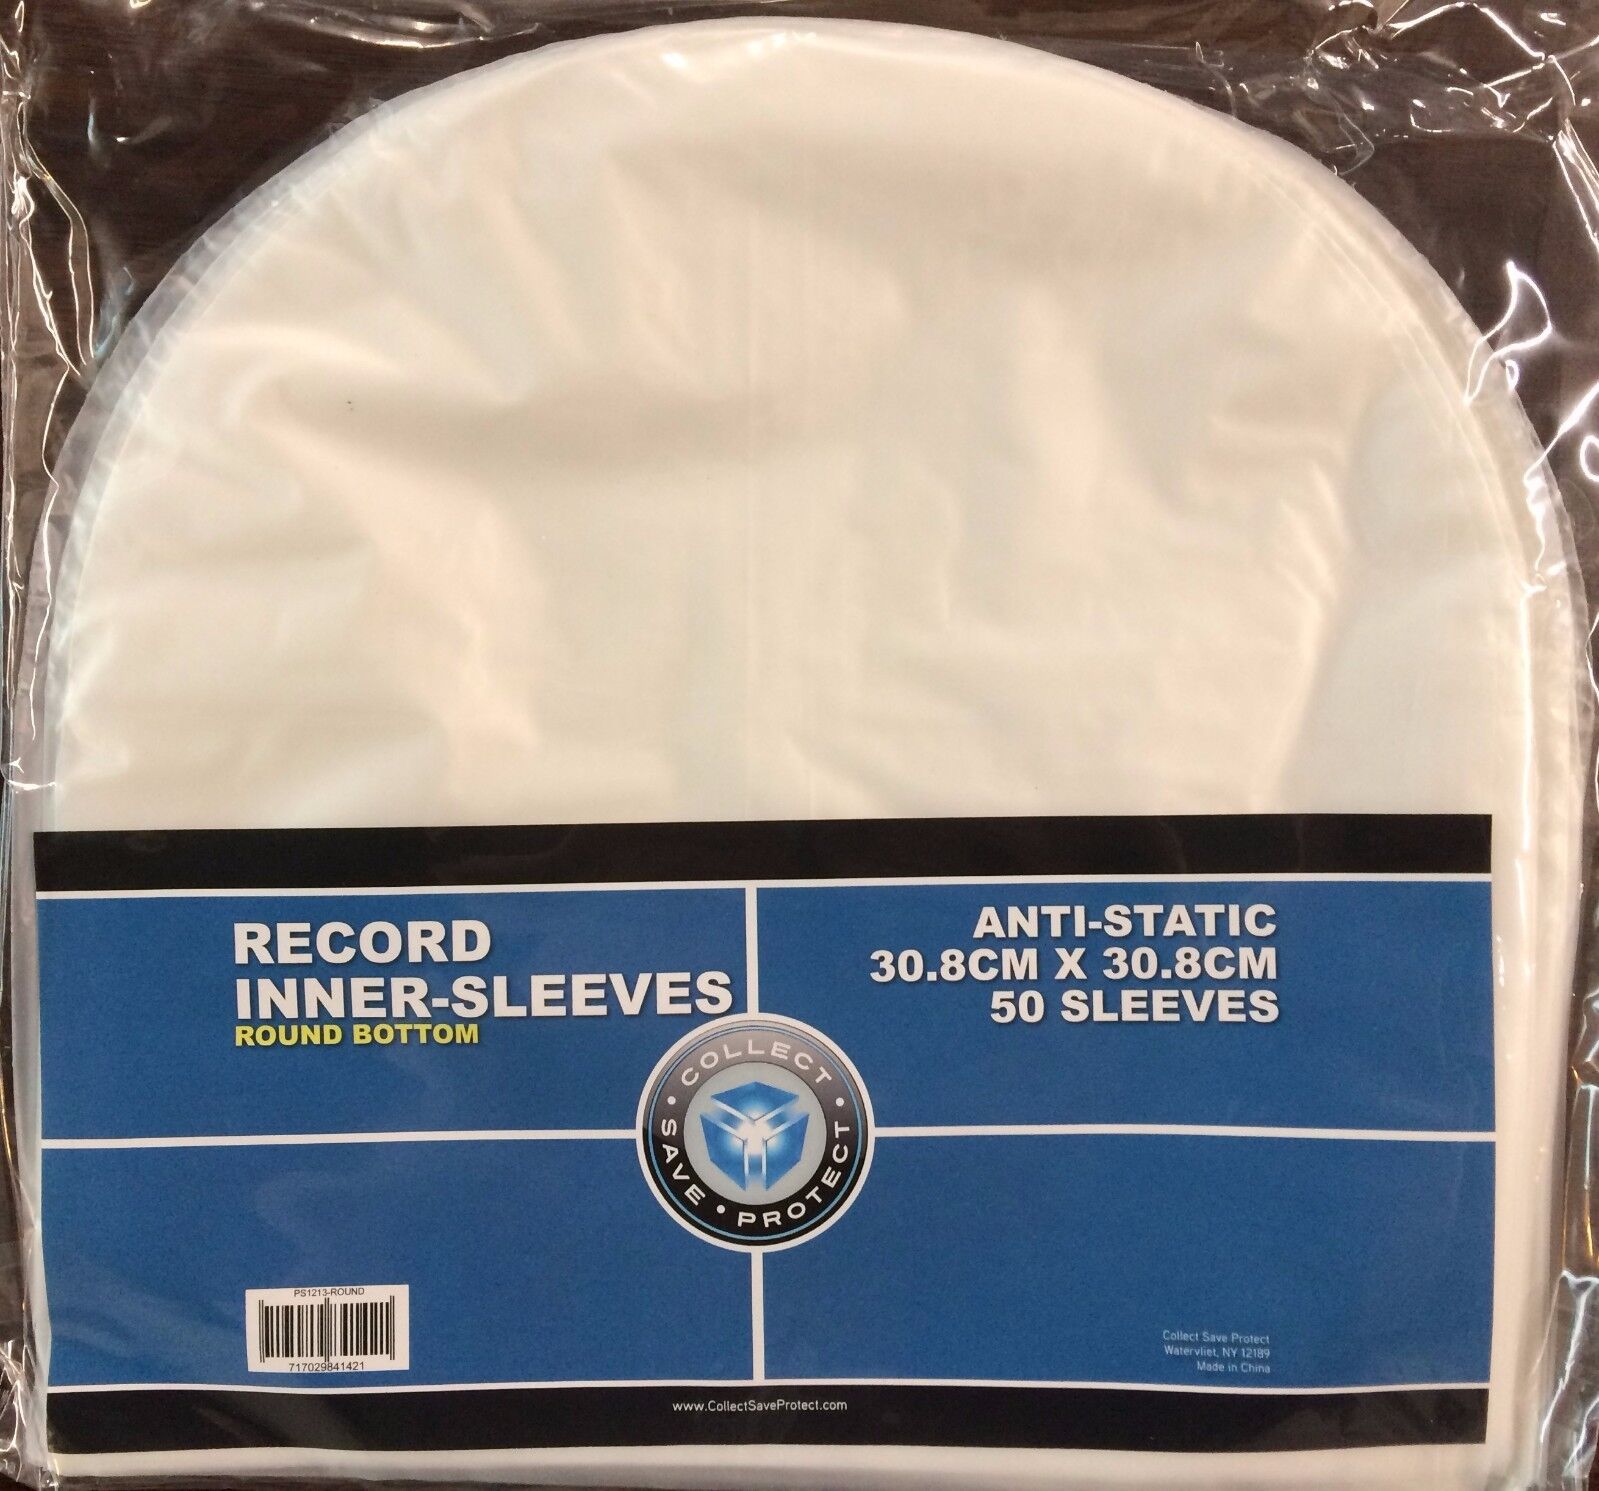 50 CSP Round Bottom Inner Sleeves for 12" Vinyl LP Record Albums COLLECT*SAVE*PROTECT PS1213-ROUND